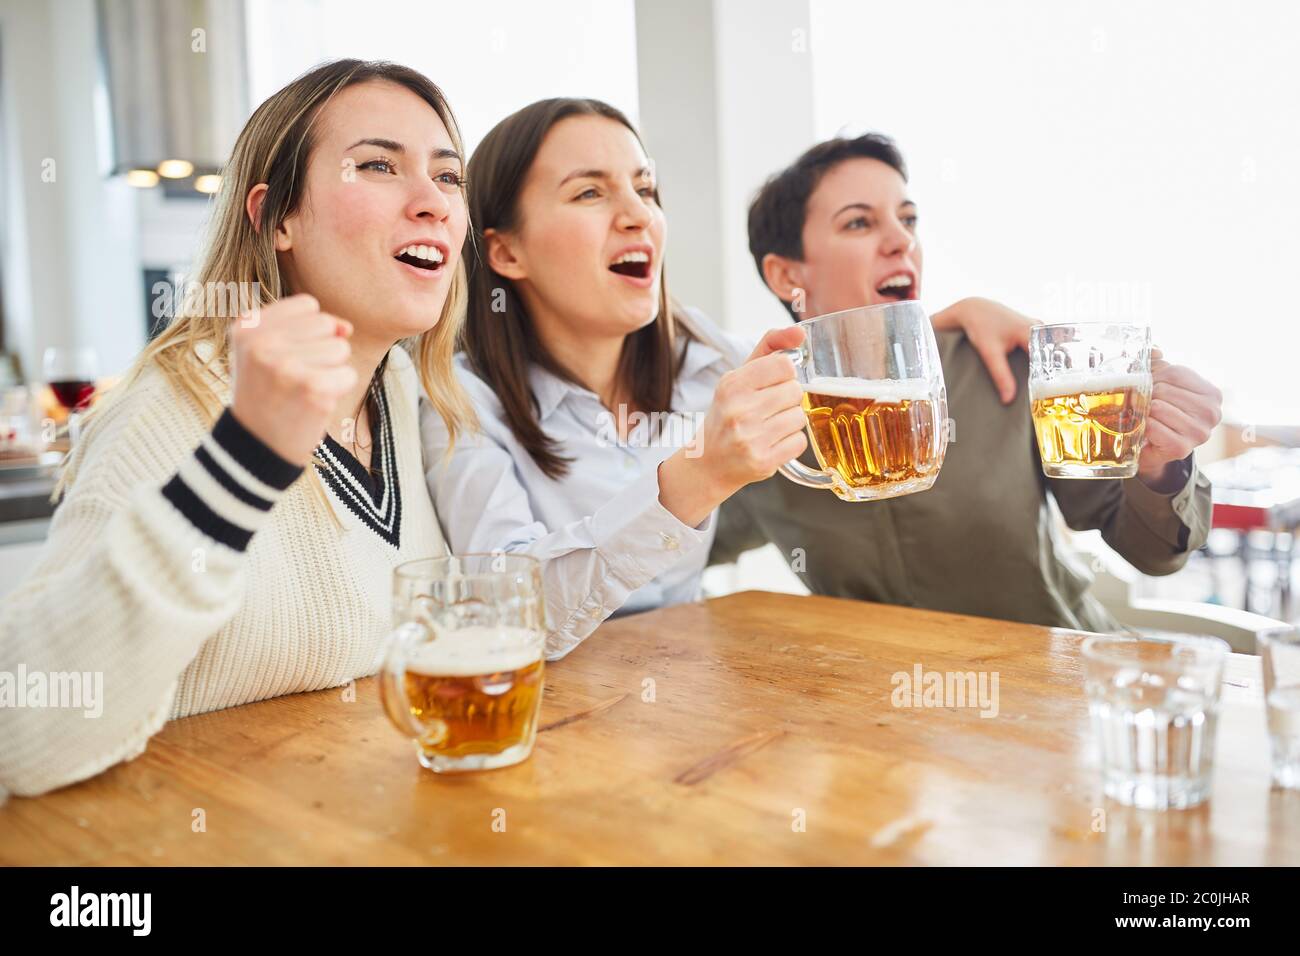 Group of women watch football and drink beer and cheer on their team Stock Photo